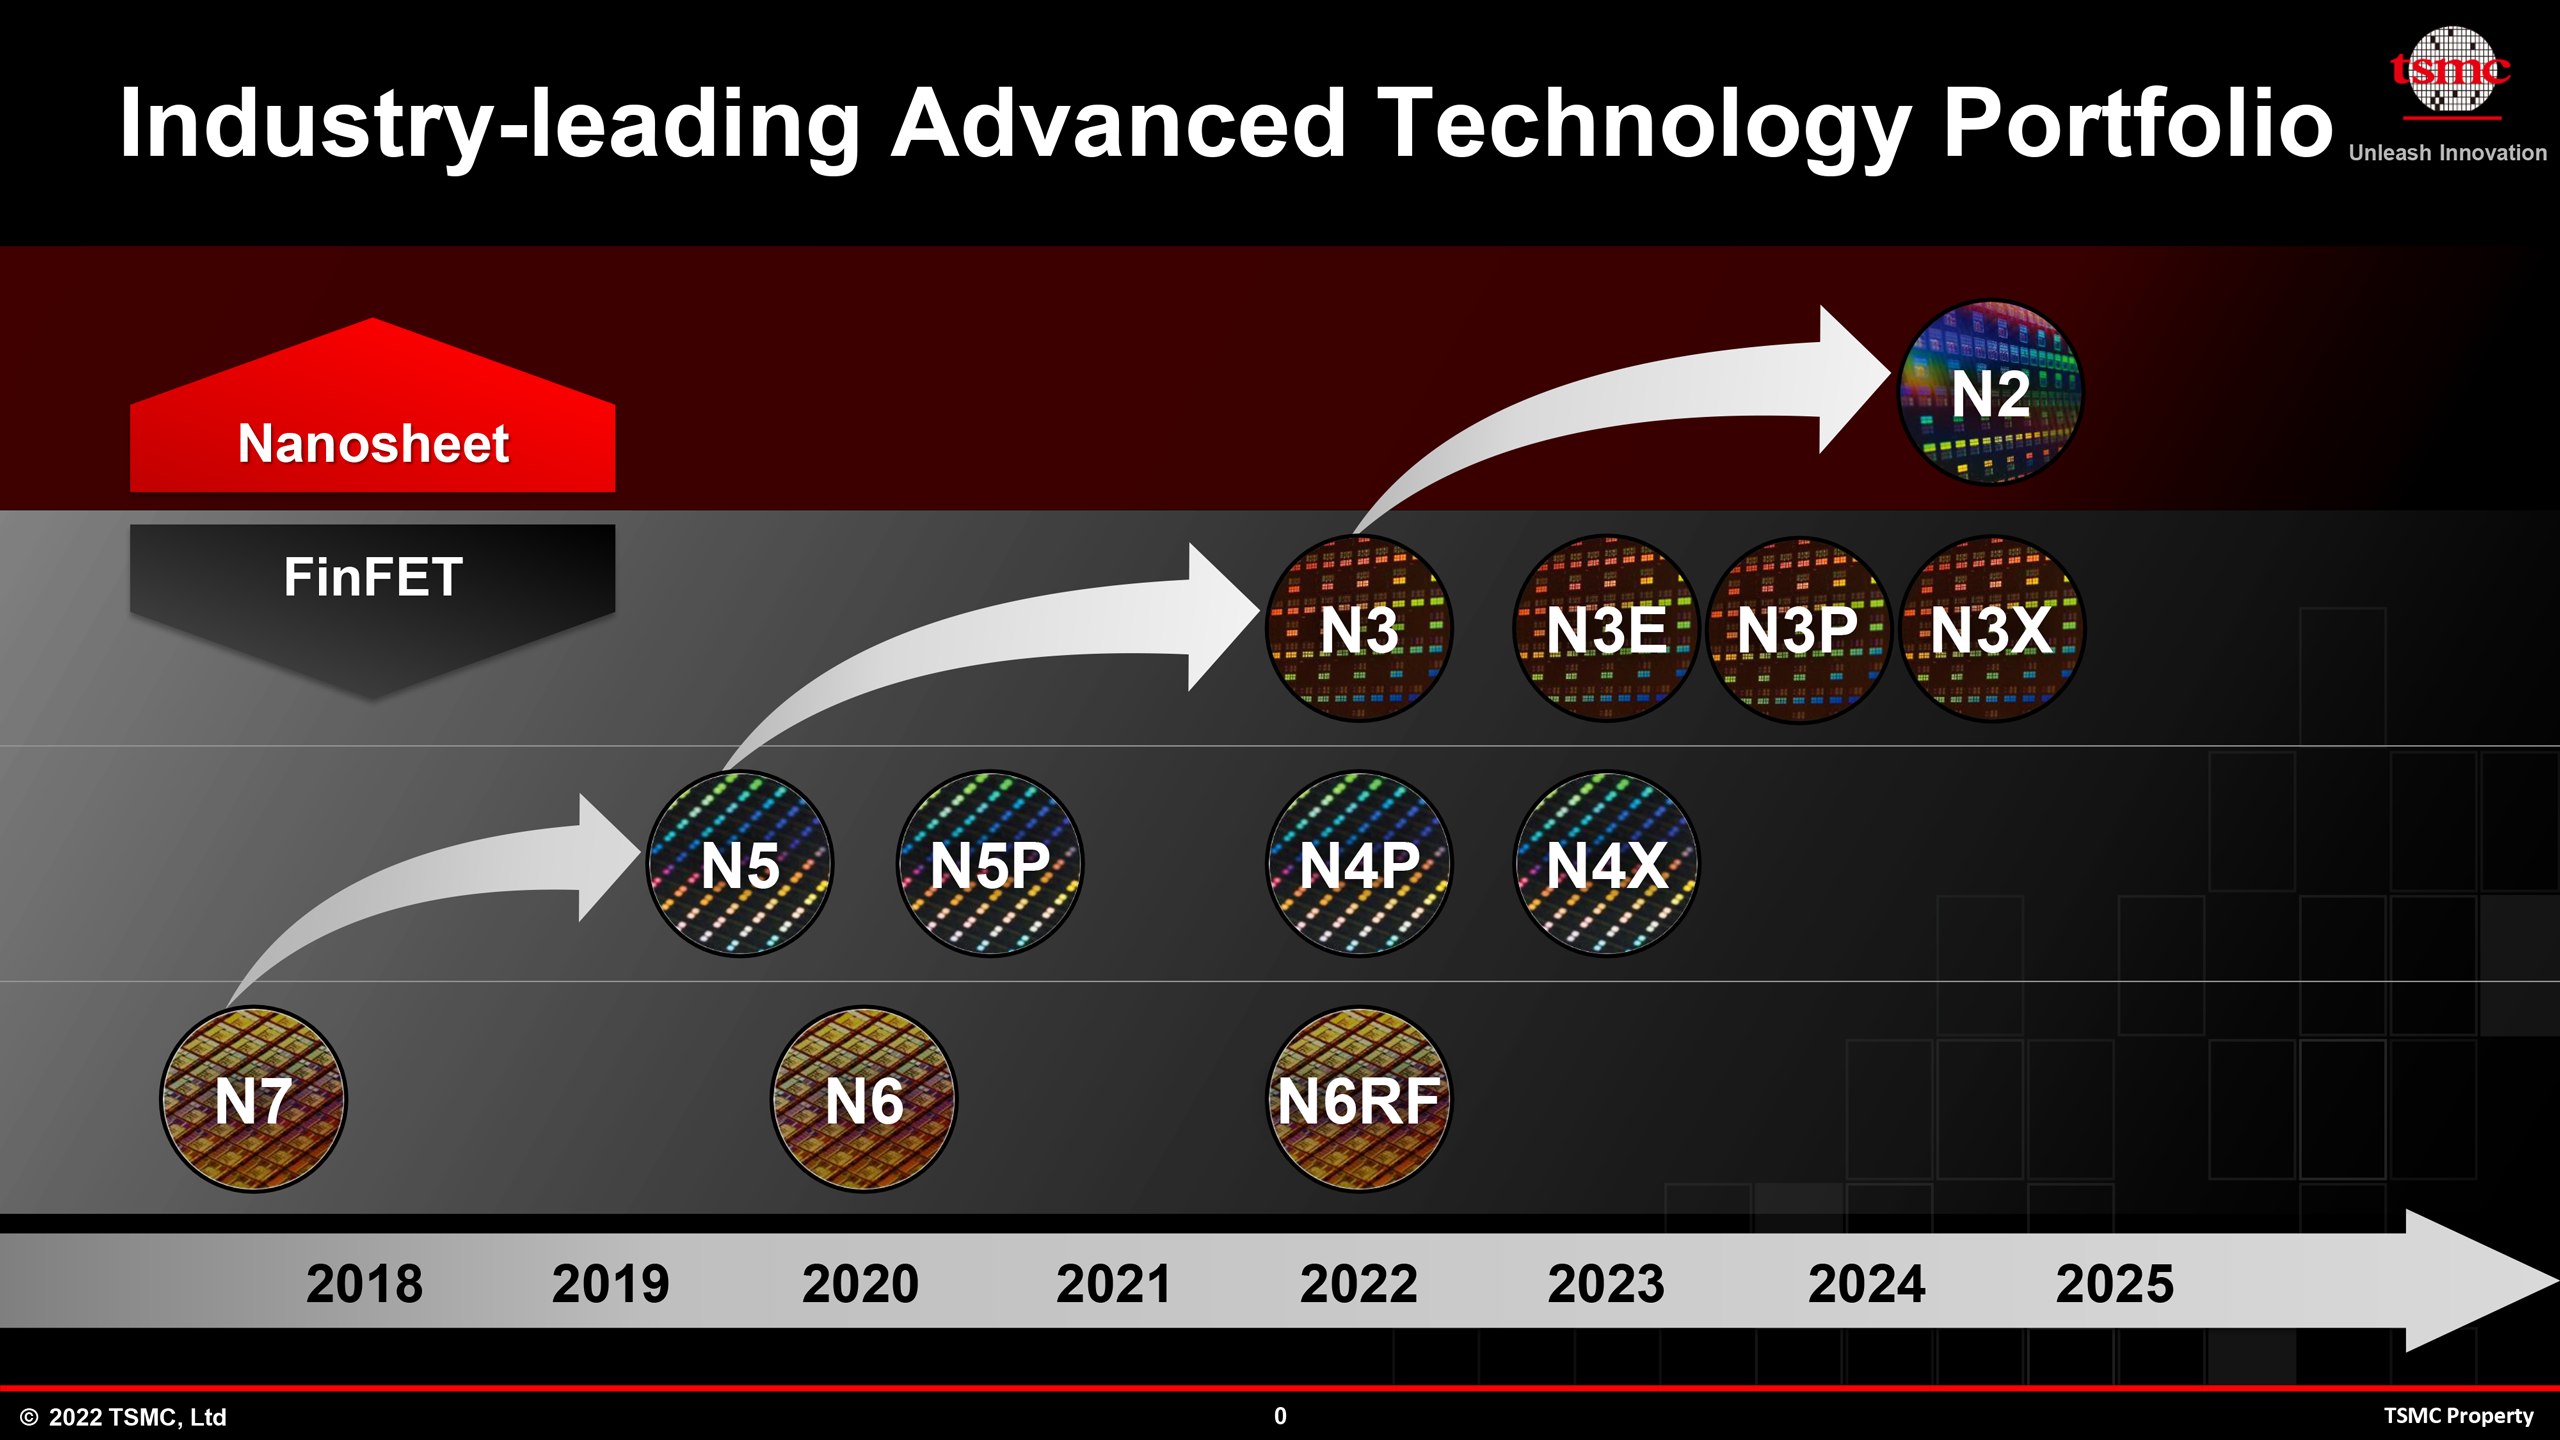 TSMC's roadmap for producing 3nm chips